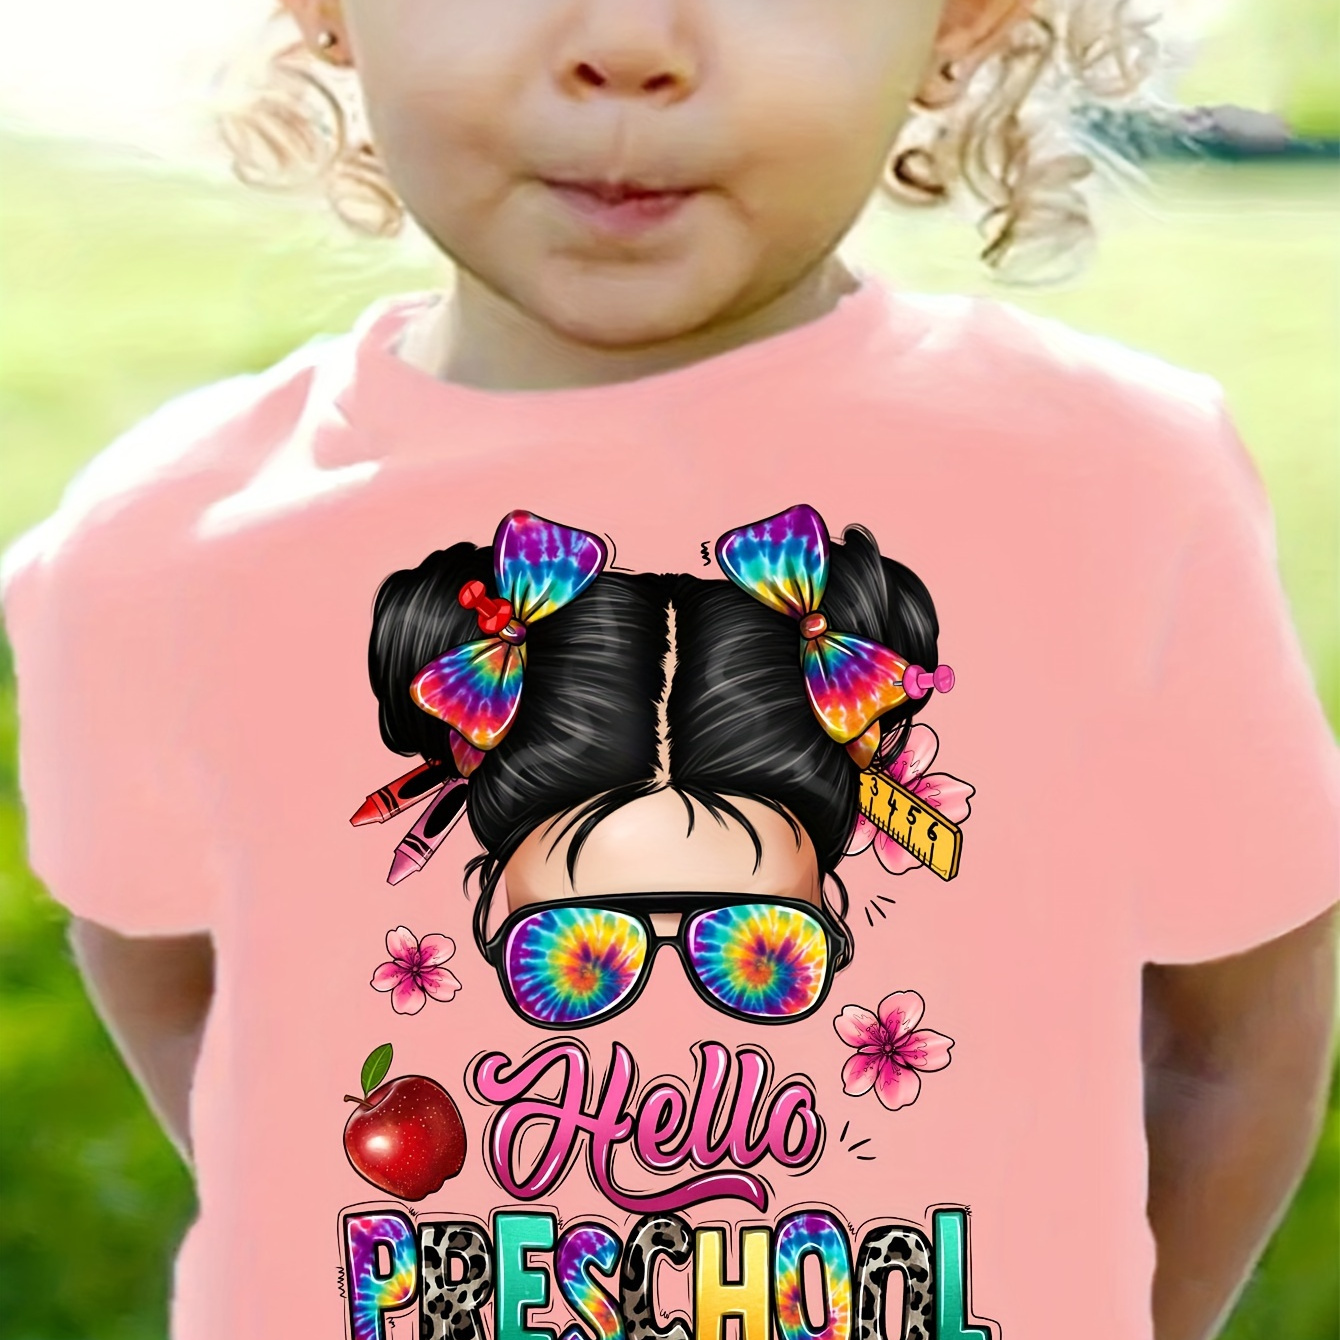 

Hello & Cool Anime Girl With Sunglasses & Graphic Print Tee, Girls' Stylish & Comfy Crew Neck Short Sleeve T-shirt For Spring & Summer, Girls' Clothes For Everyday Life